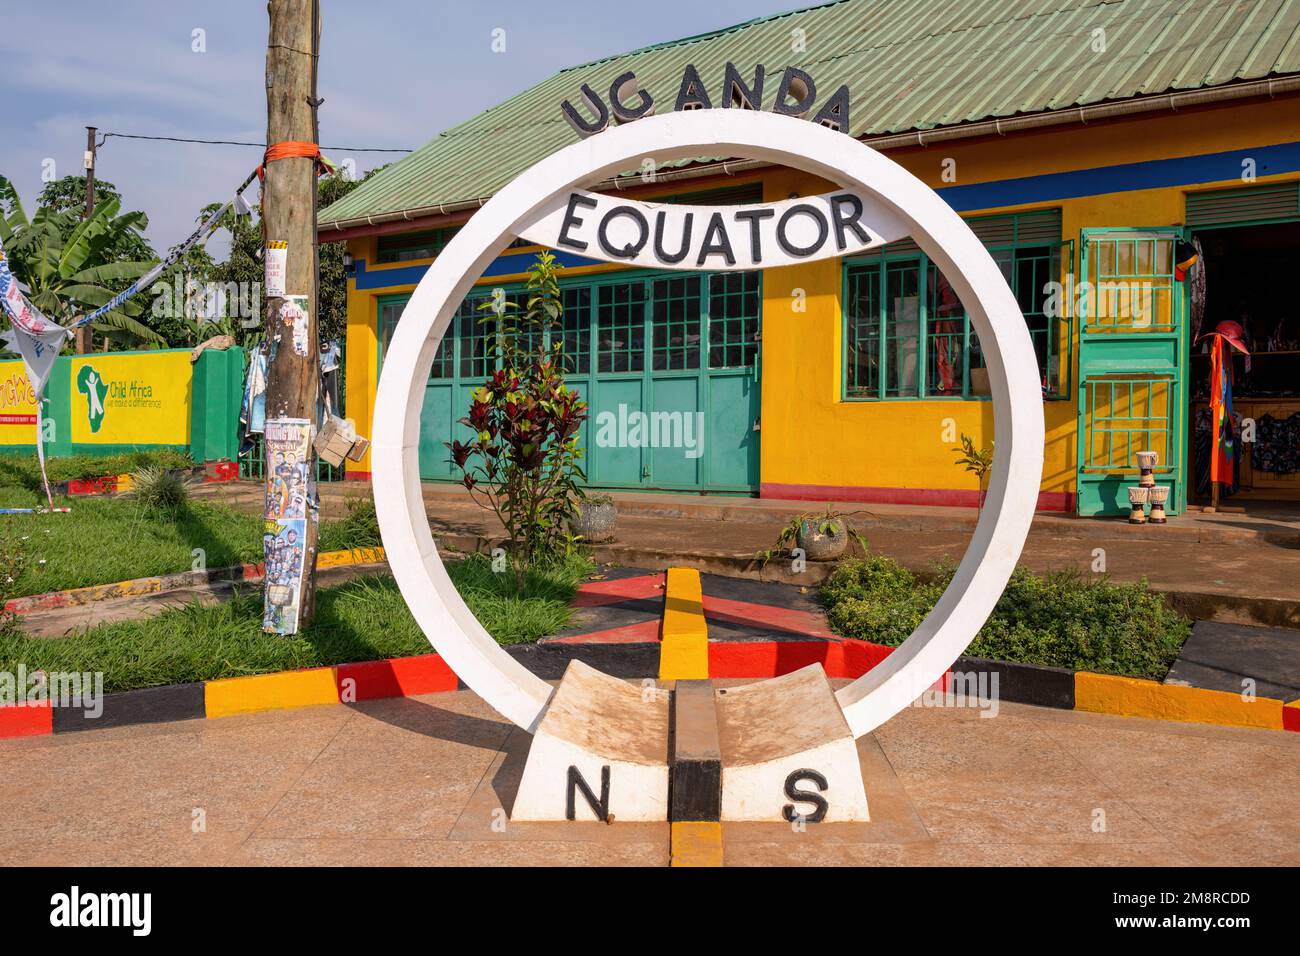 Equator sign and installation in the Ugandan town of Kayabwe, on the Kampala - Masaka highway.  Popular photo opportunity for tourists and travellers. Stock Photo